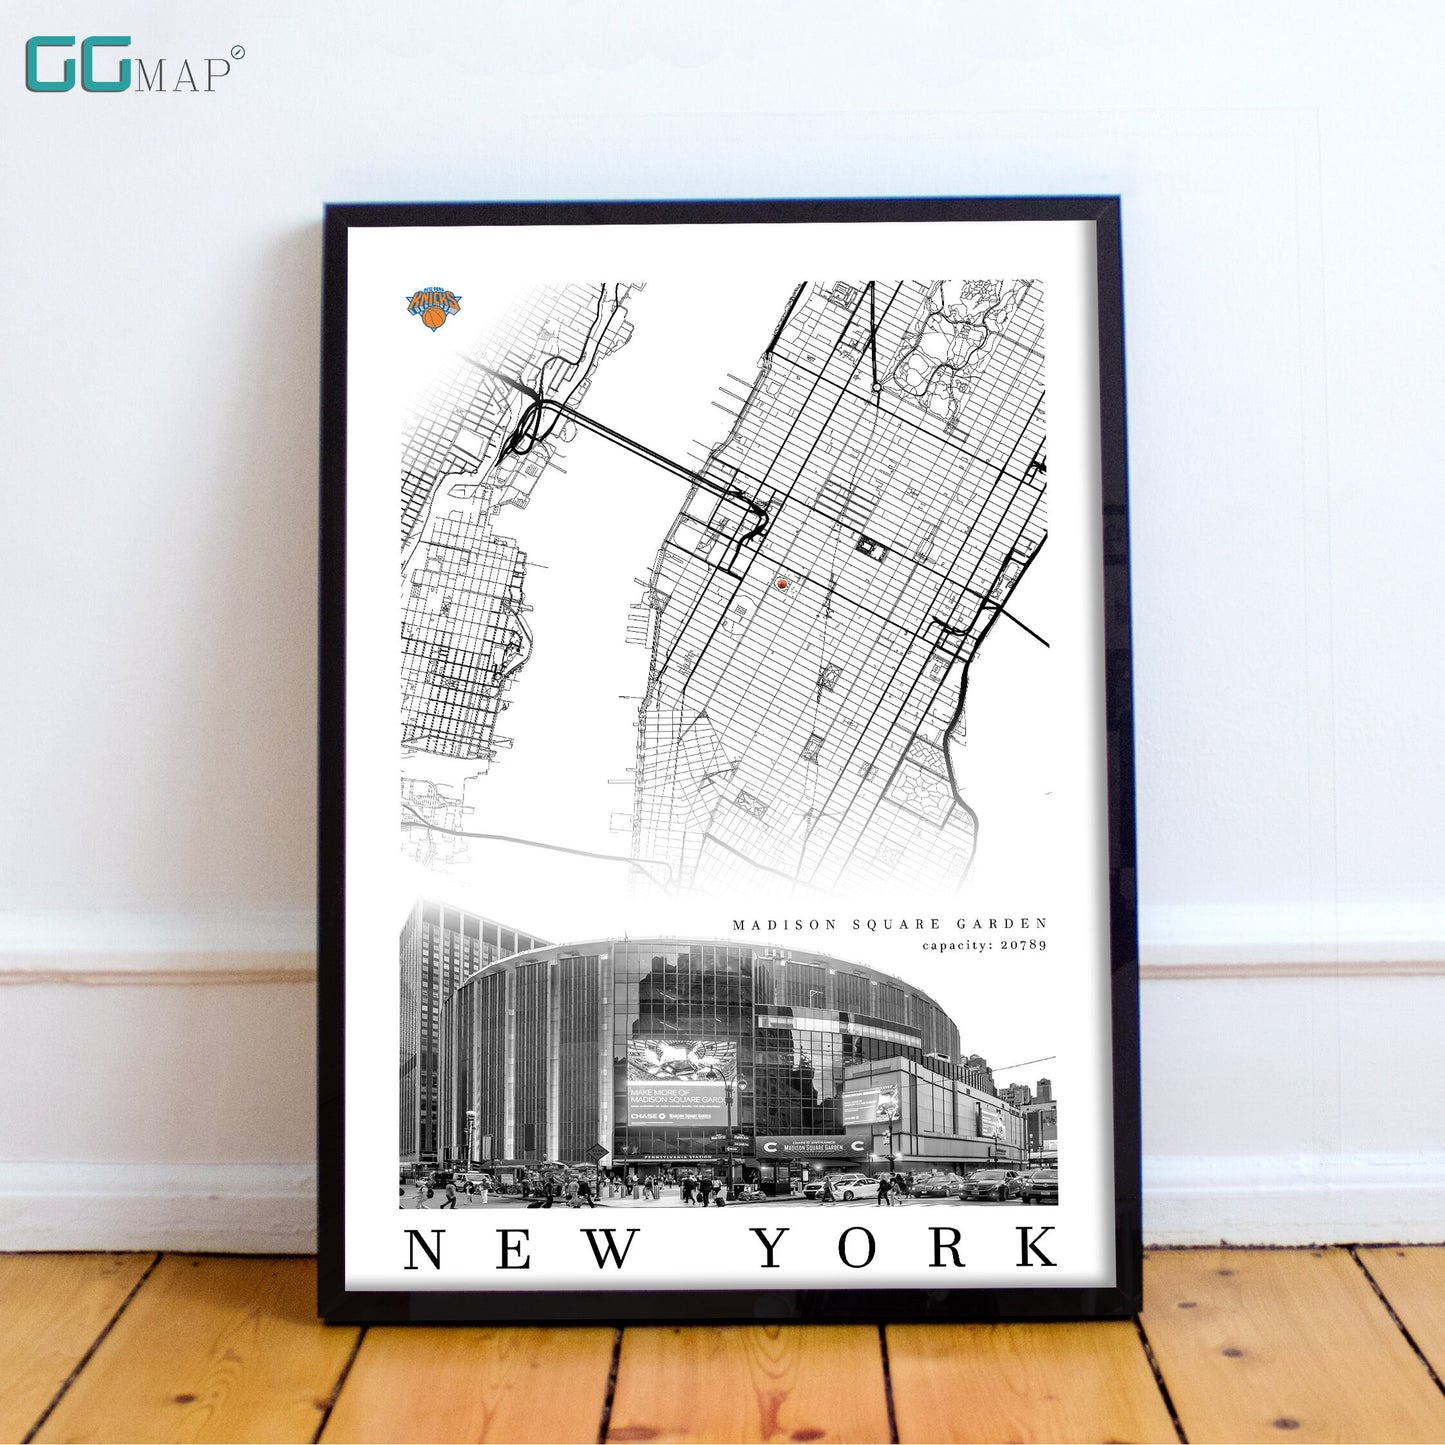 City map of NEW YORK - Madison Square Garden - Home Decor New York - Madison Square Garden wall decor - New York poster - Print map